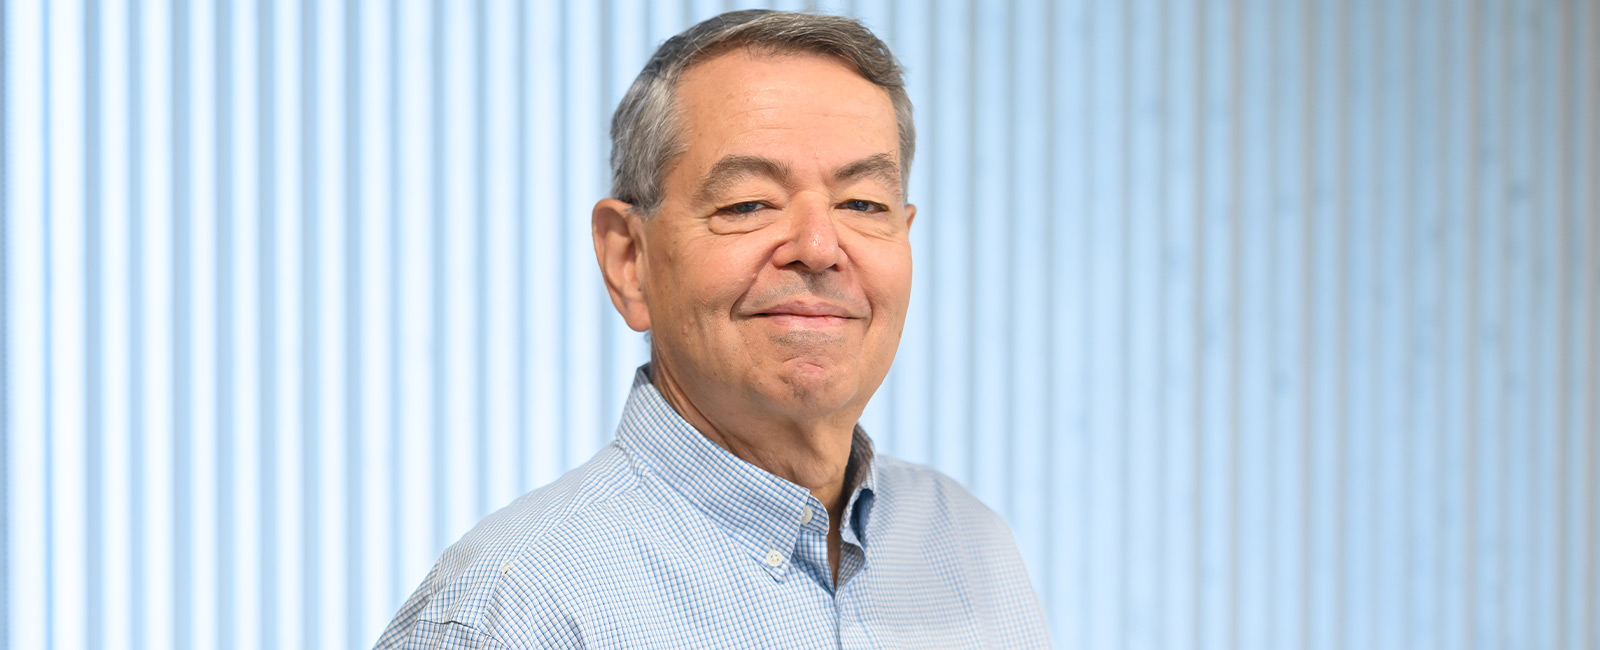 Professor Steve Buchwald smiles in front of a blue background.